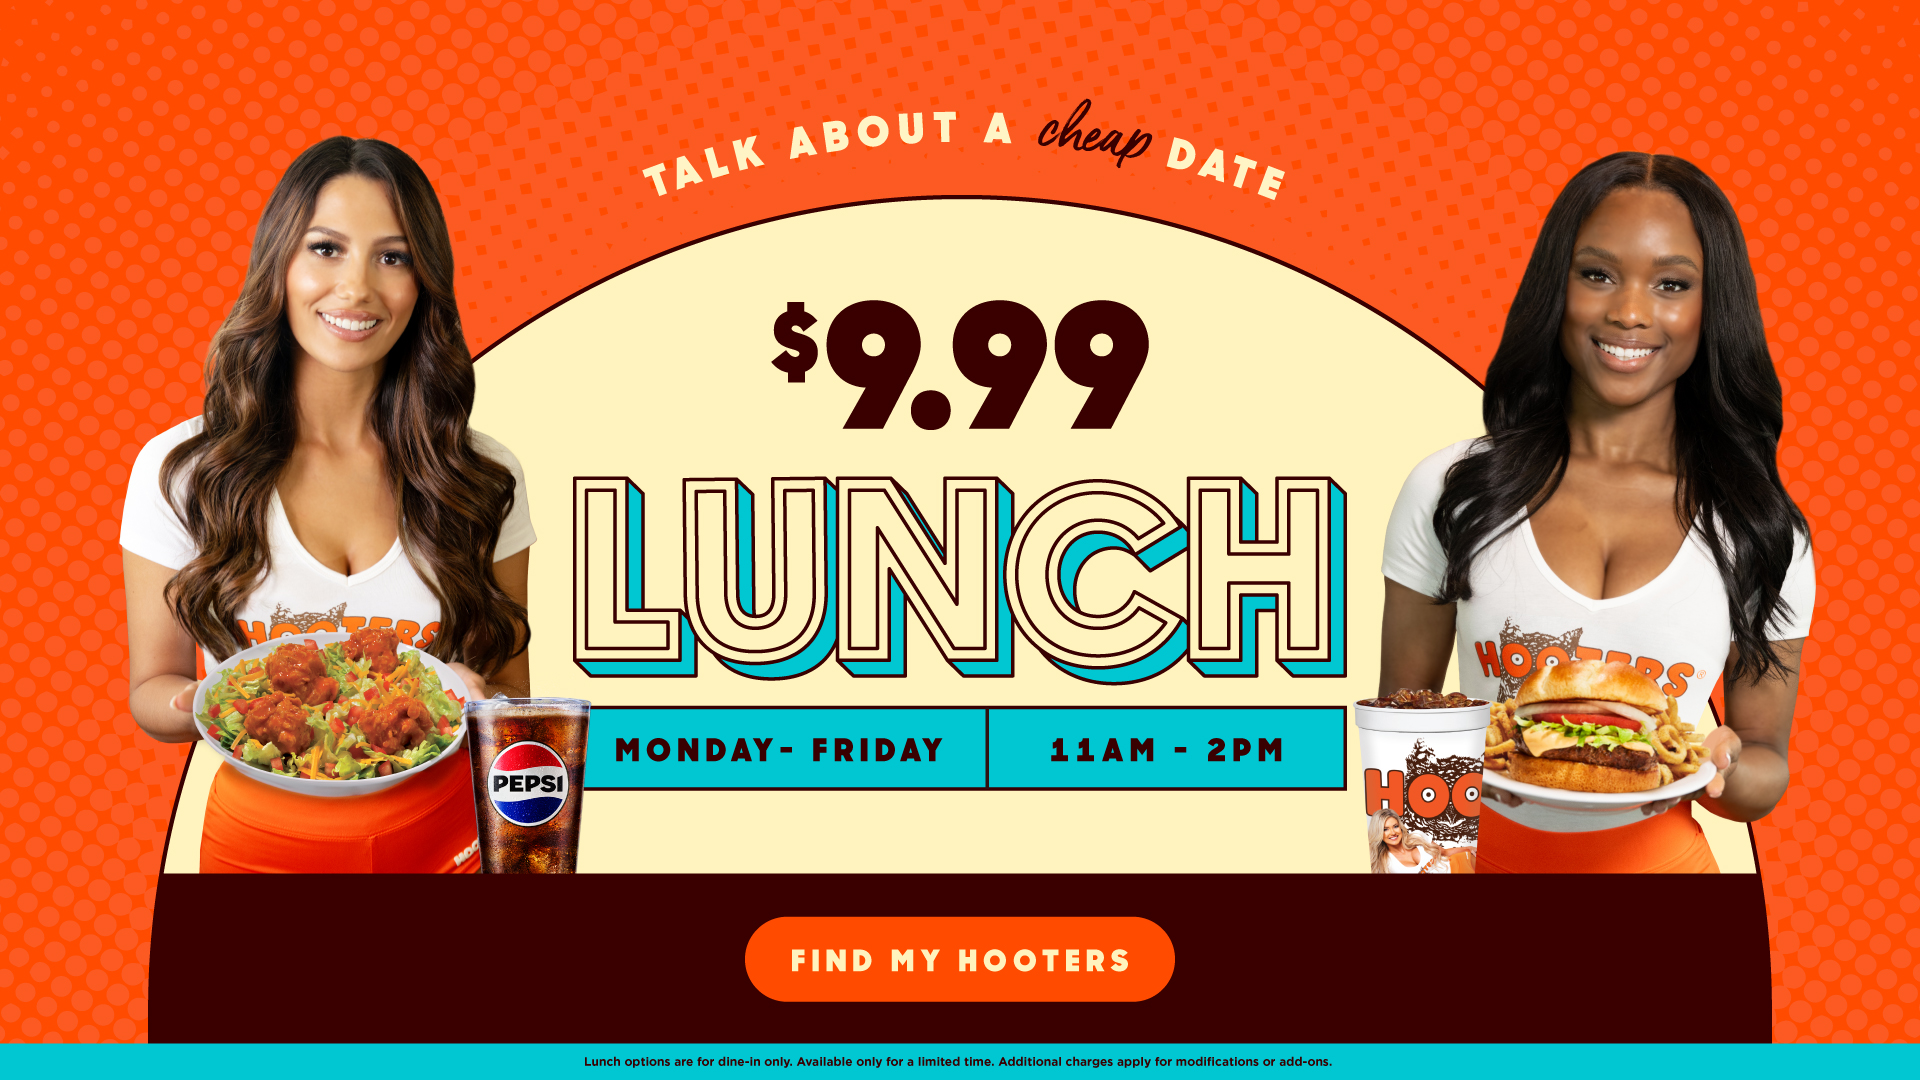 Talk about a cheap date. $9.99 lunch Monday - Friday 11am - 2pm